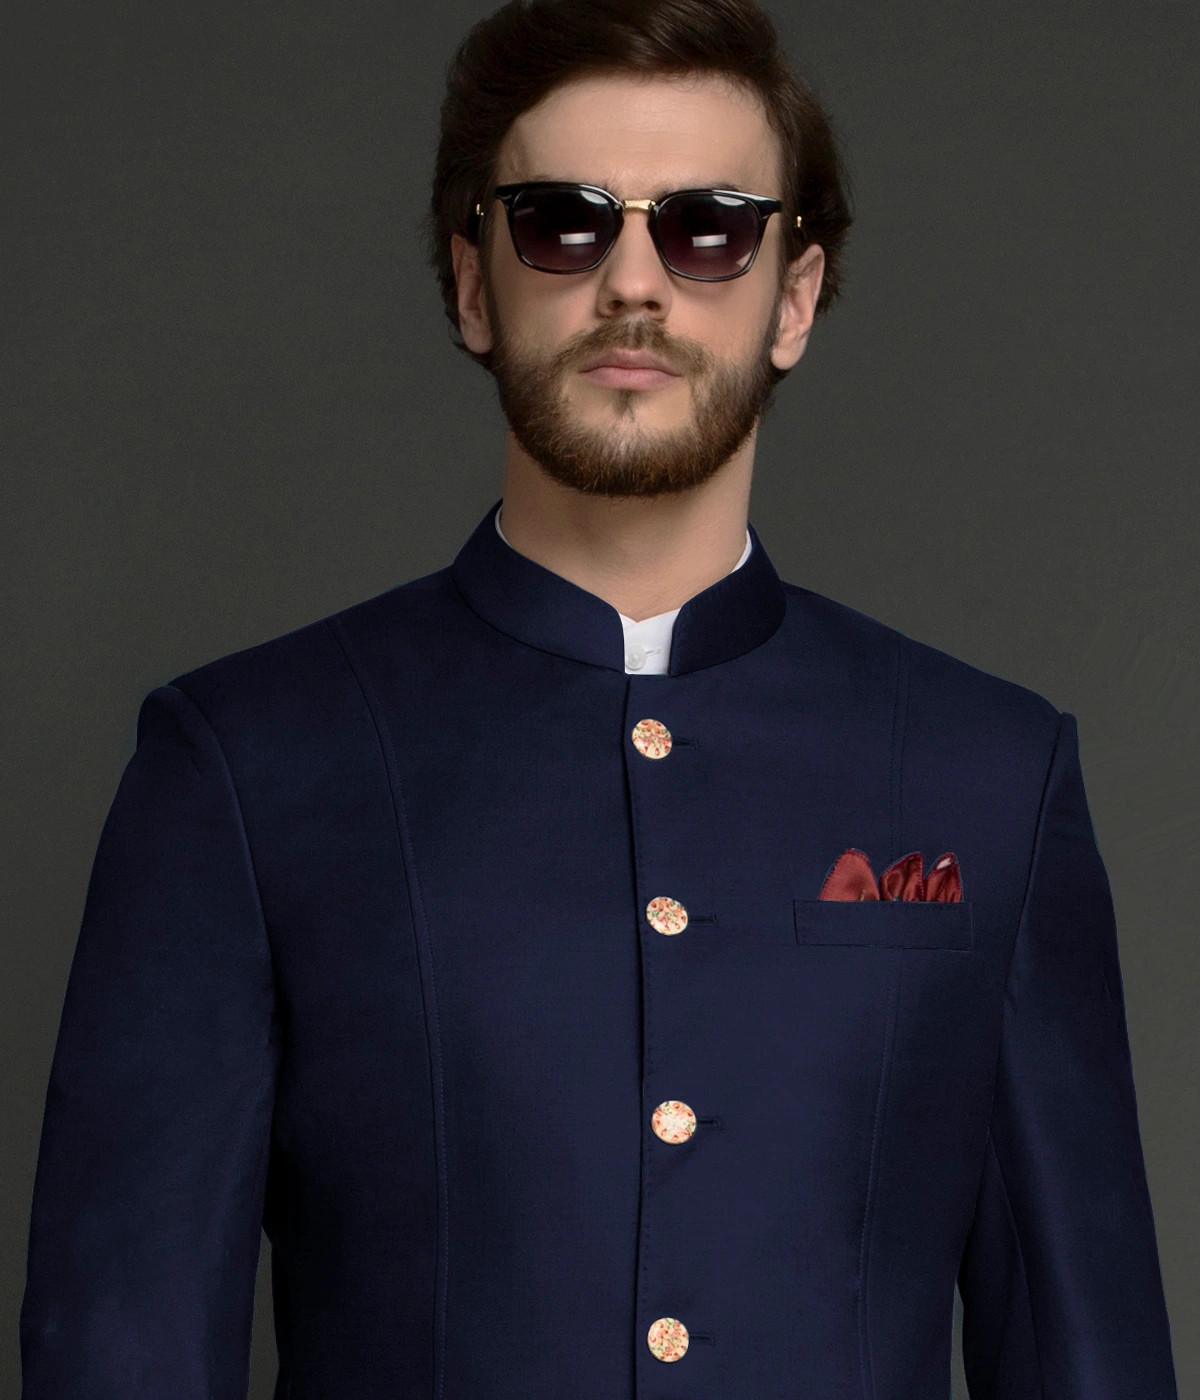 MK boutique - A classic navy blue bandhgala suit paired with white pant!  This velvet bandhgala is perfect for the occasion. Visit our boutique to  explore more unique design at MK BOUTIQUE #